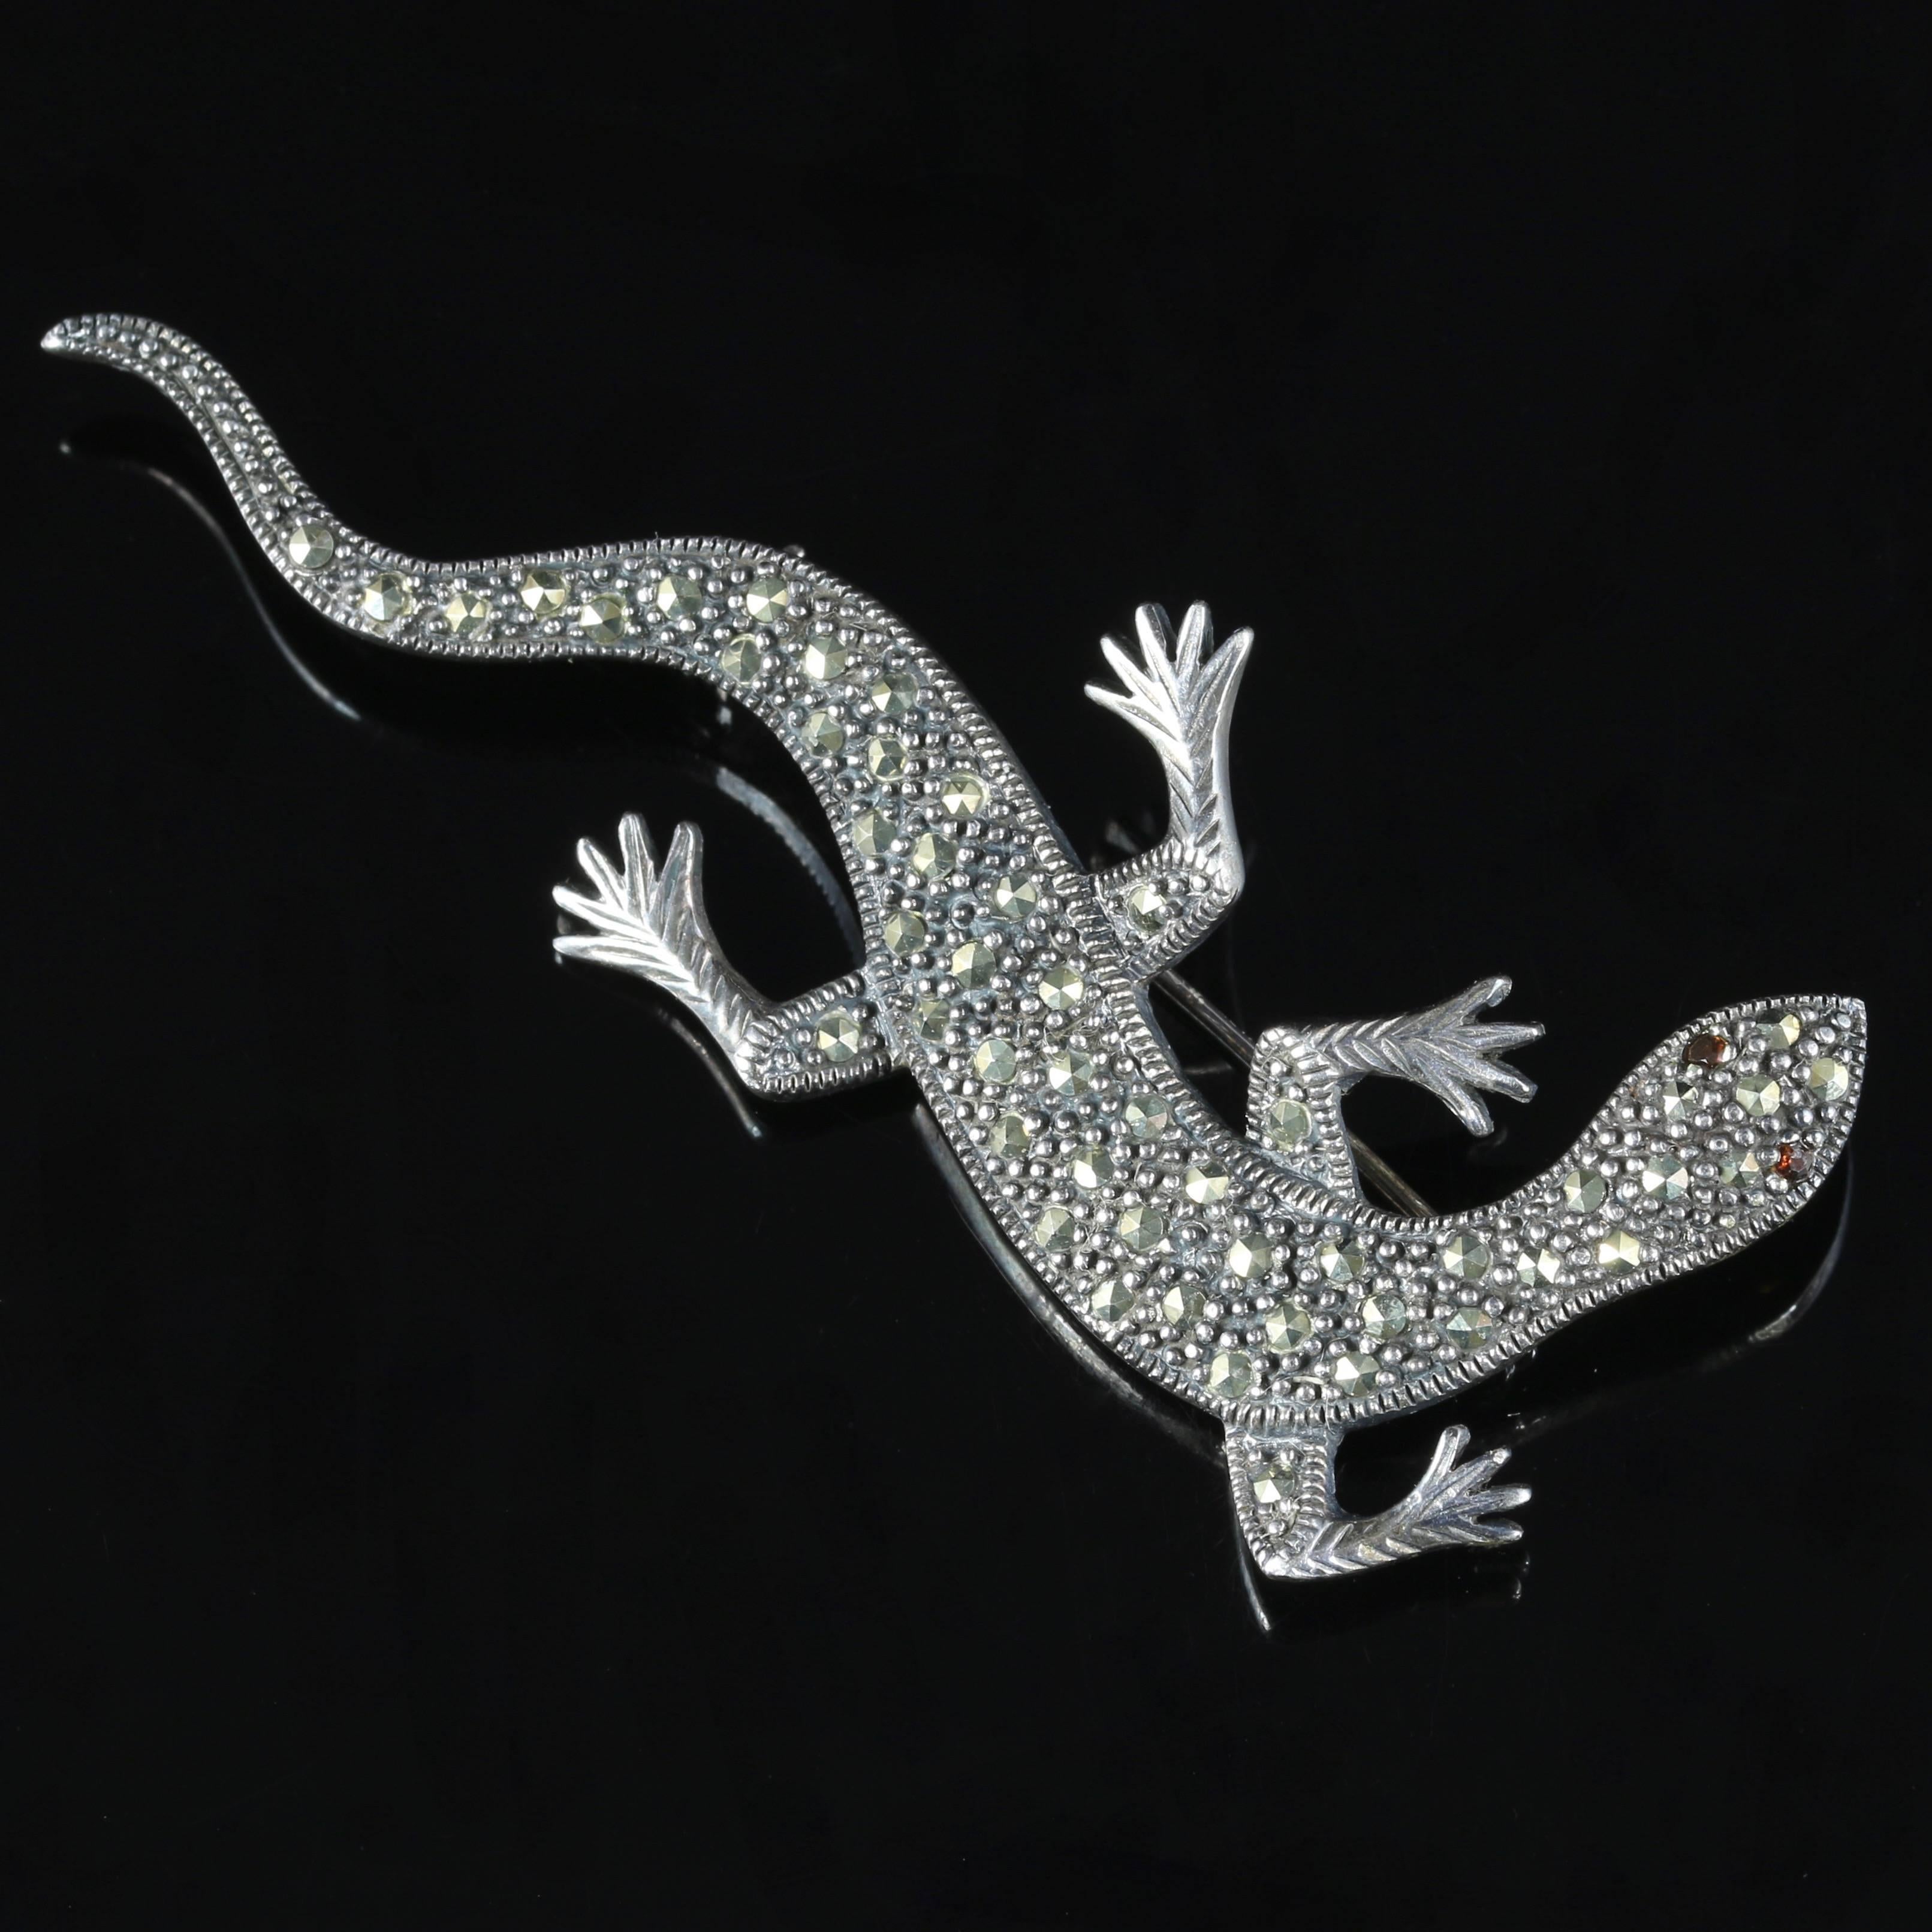 This fabulous antique Sterling Silver lizard brooch is Circa 1900

Set with Marcasites all over his body and Garnets for his eyes, this brooch is stunning. 

Marcasite jewellery has been made since the time of the Ancient Greeks. It was particularly